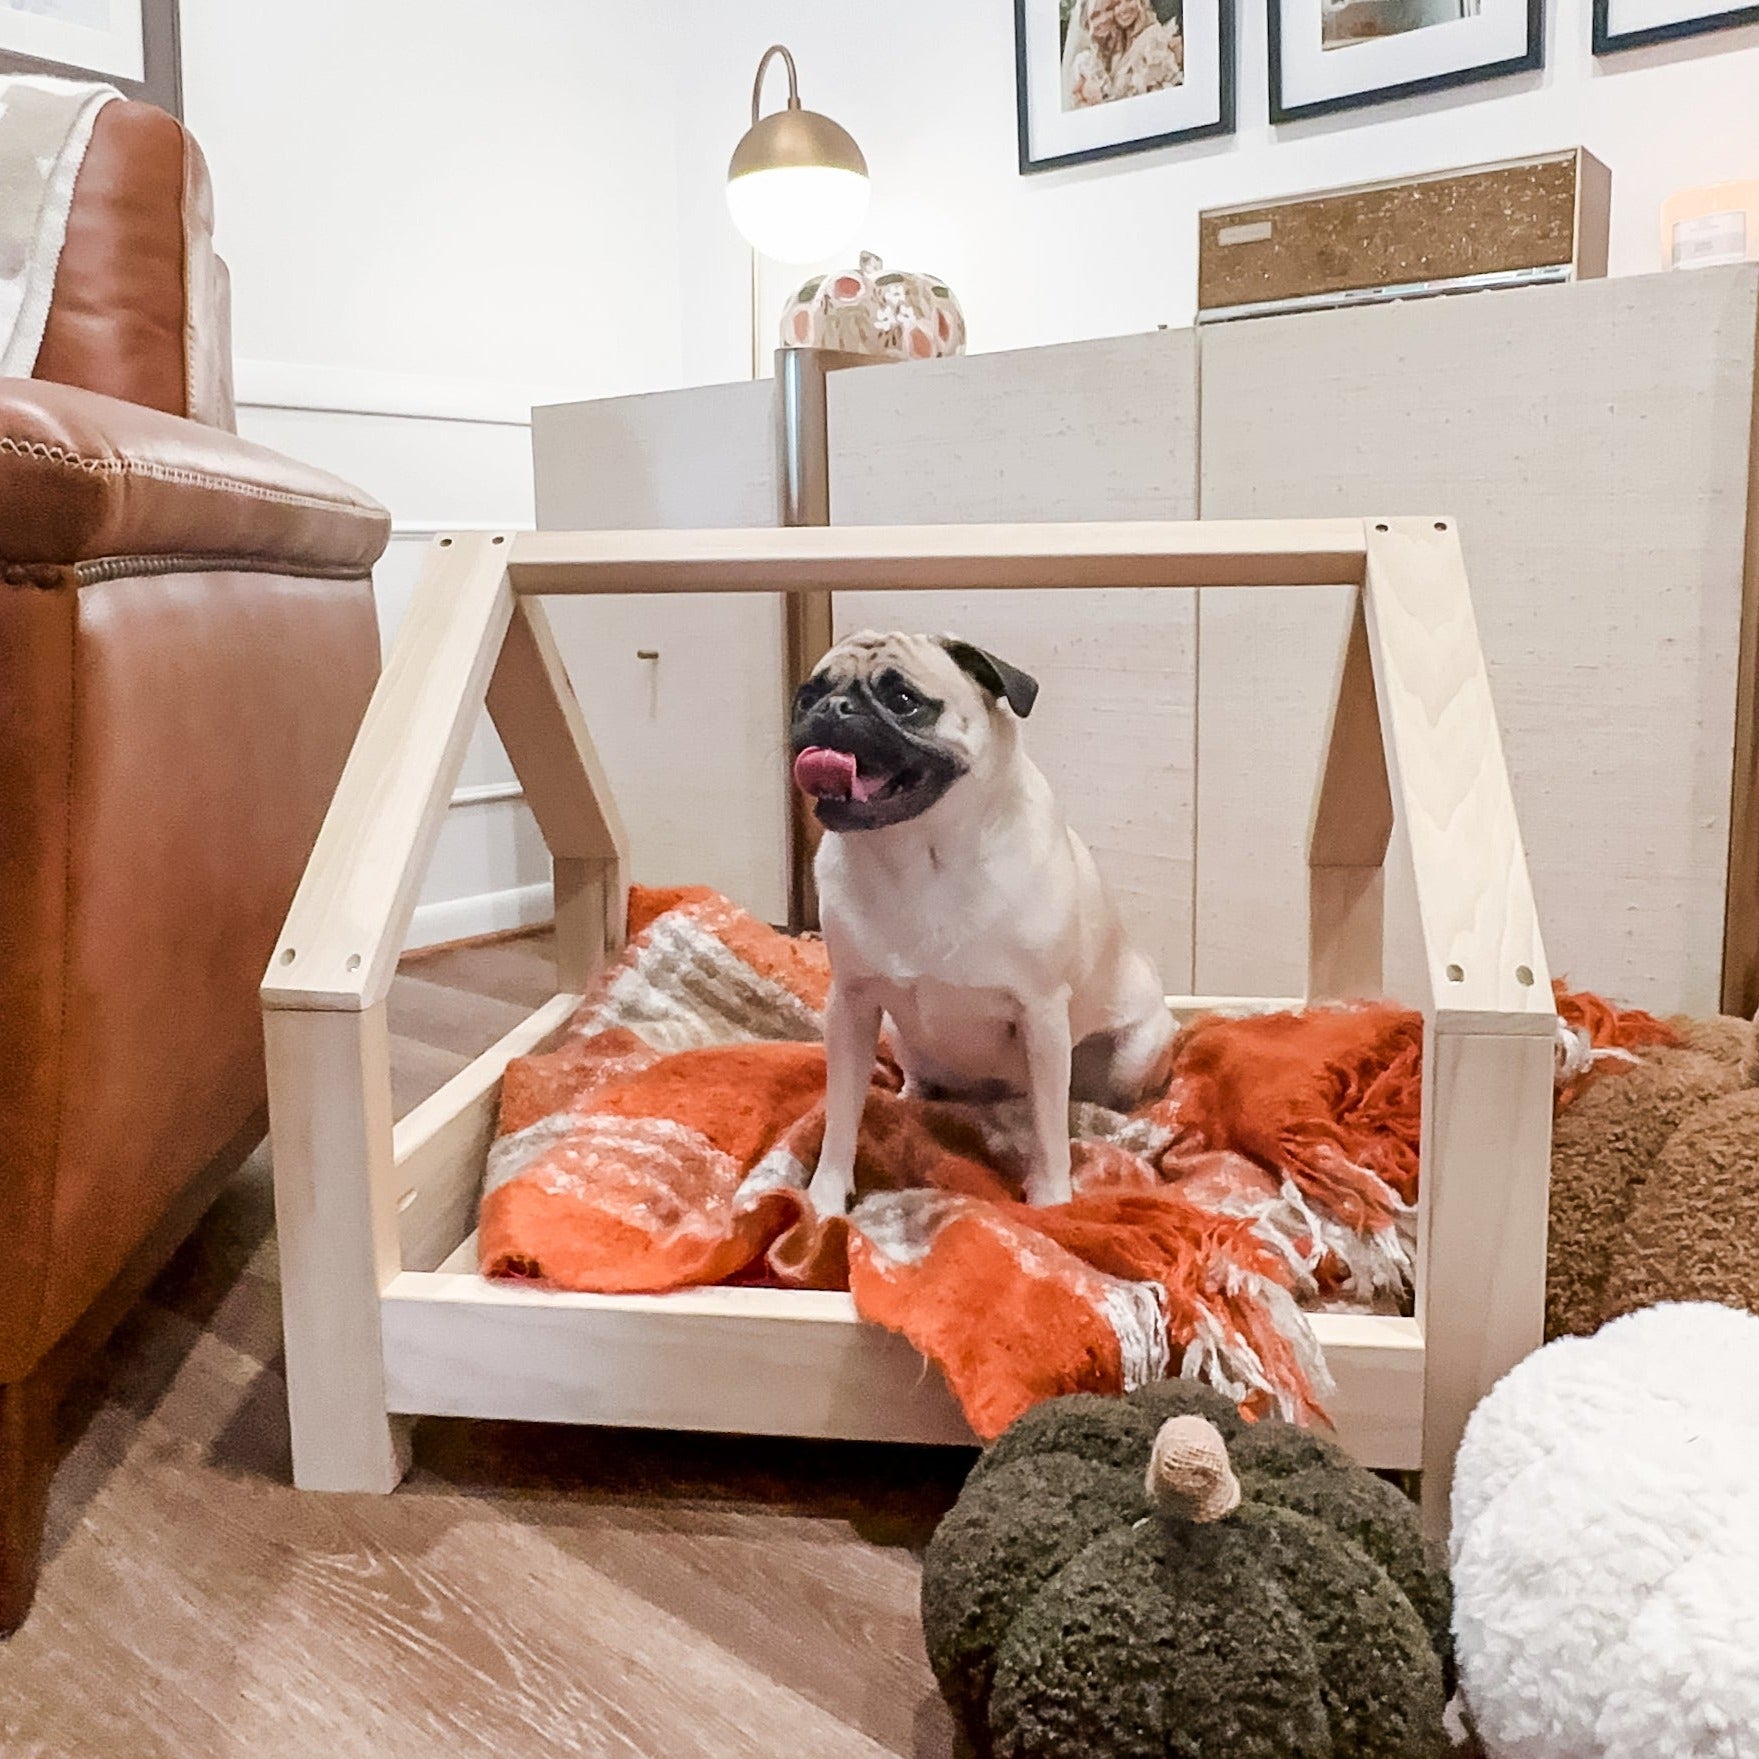 A miniature pet bed crafted entirely from smooth wood, designed for small animals such as cats or small dogs. The bed features a simple yet elegant frame, with rounded corners for comfort and safety. Inside, a soft cushion provides a cozy spot for pets to rest and relax. Placed in a cozy corner of the room with a small blanket nearby, this wooden pet bed offers a stylish and comfortable retreat for furry companions to curl up in.